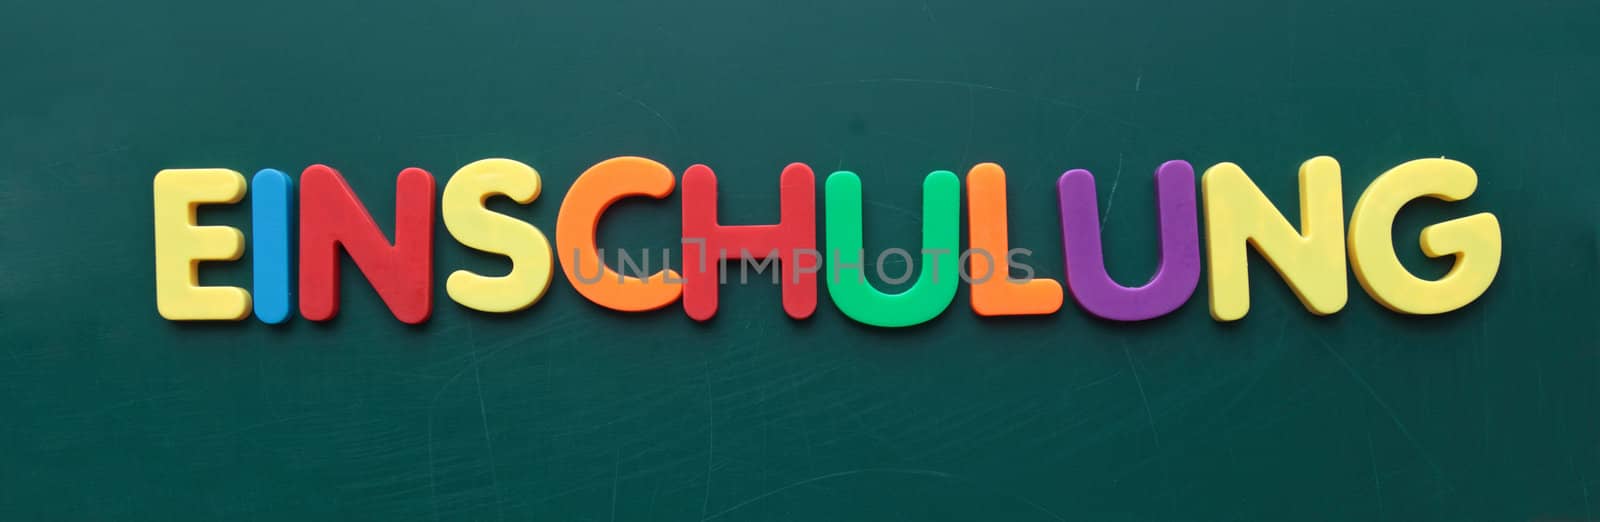 The german term for enrollment in colorful letters on a blackboard.